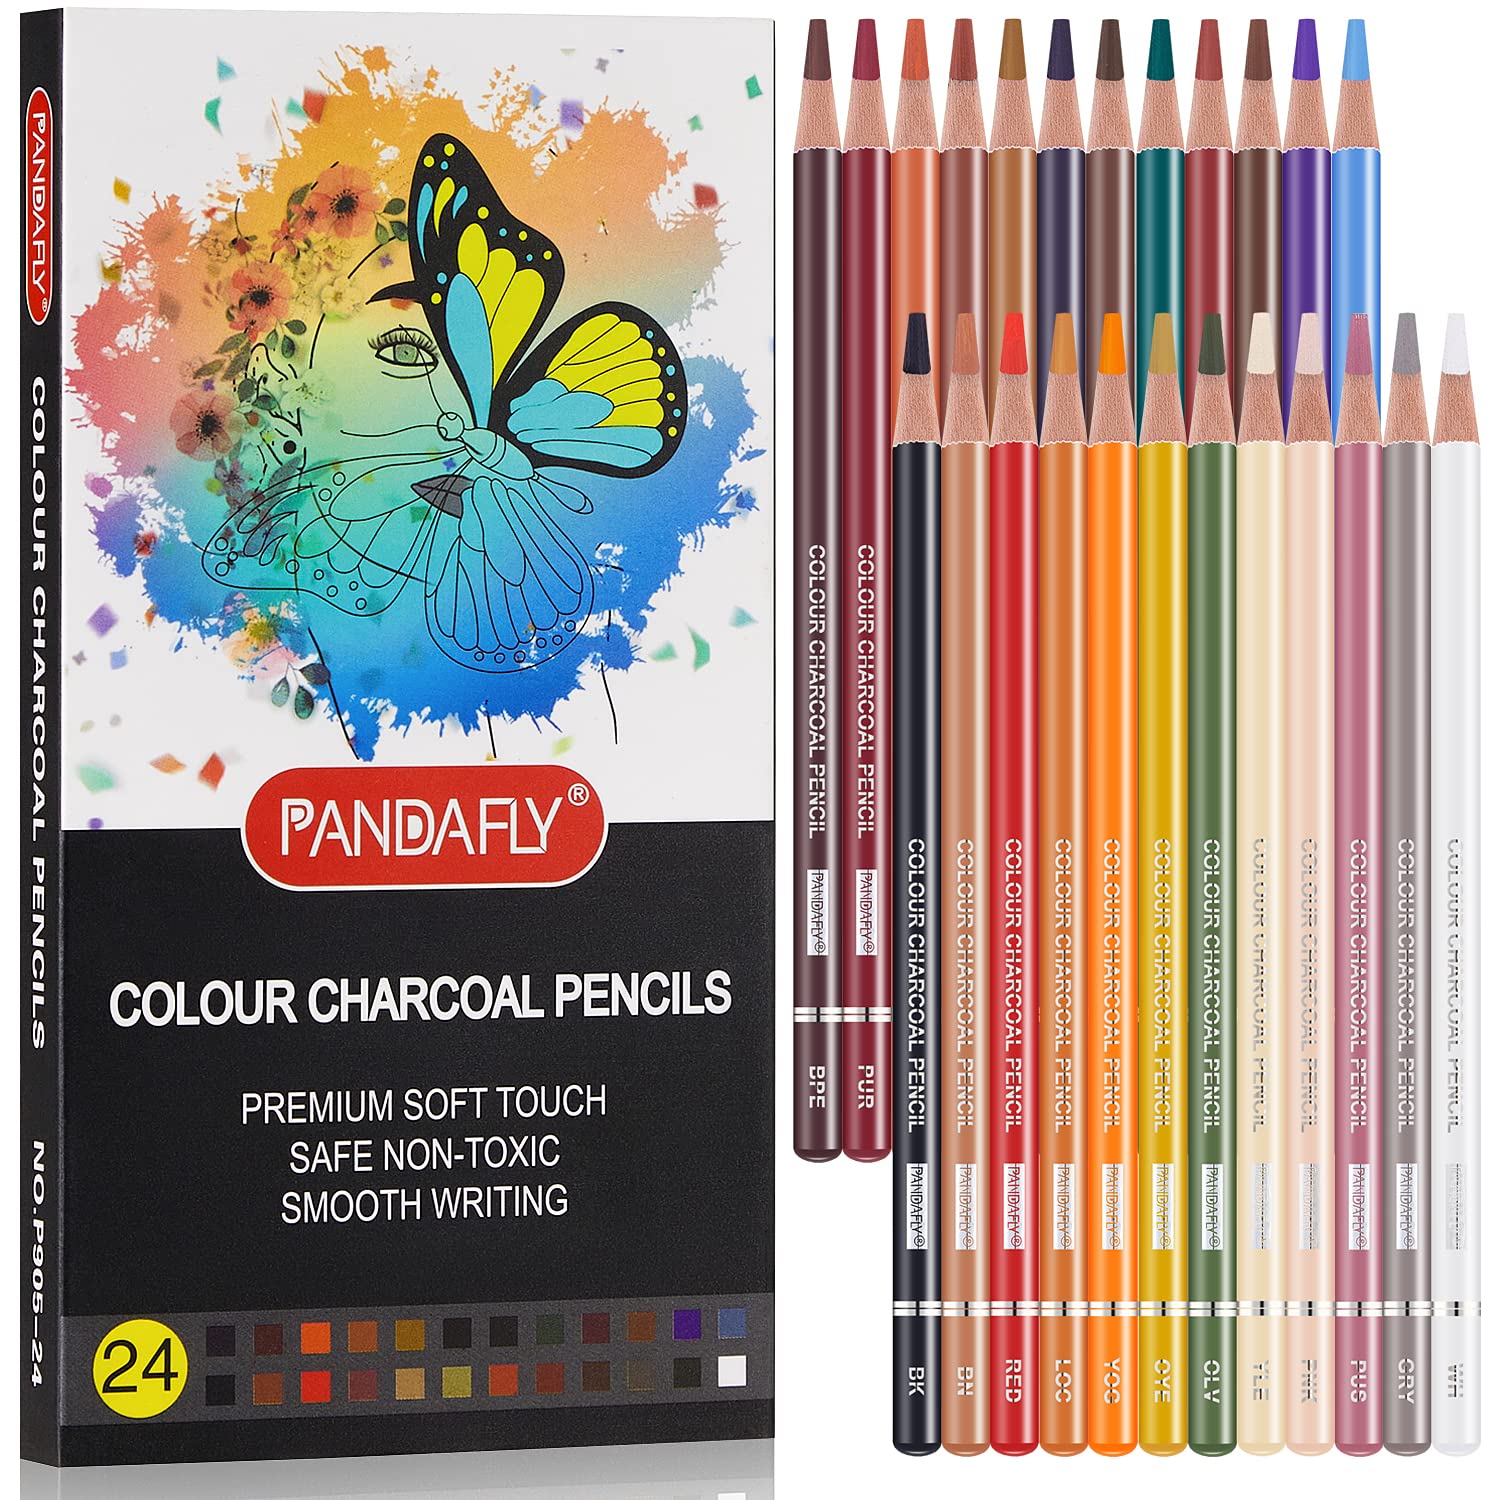  PANDAFLY White Charcoal Pencils Drawing Set, Professional 5  Pieces White Sketch Pencils for Drawing, Sketching, Shading, Blending,  White Chalk Pencils for Beginners & Artists : Arts, Crafts & Sewing